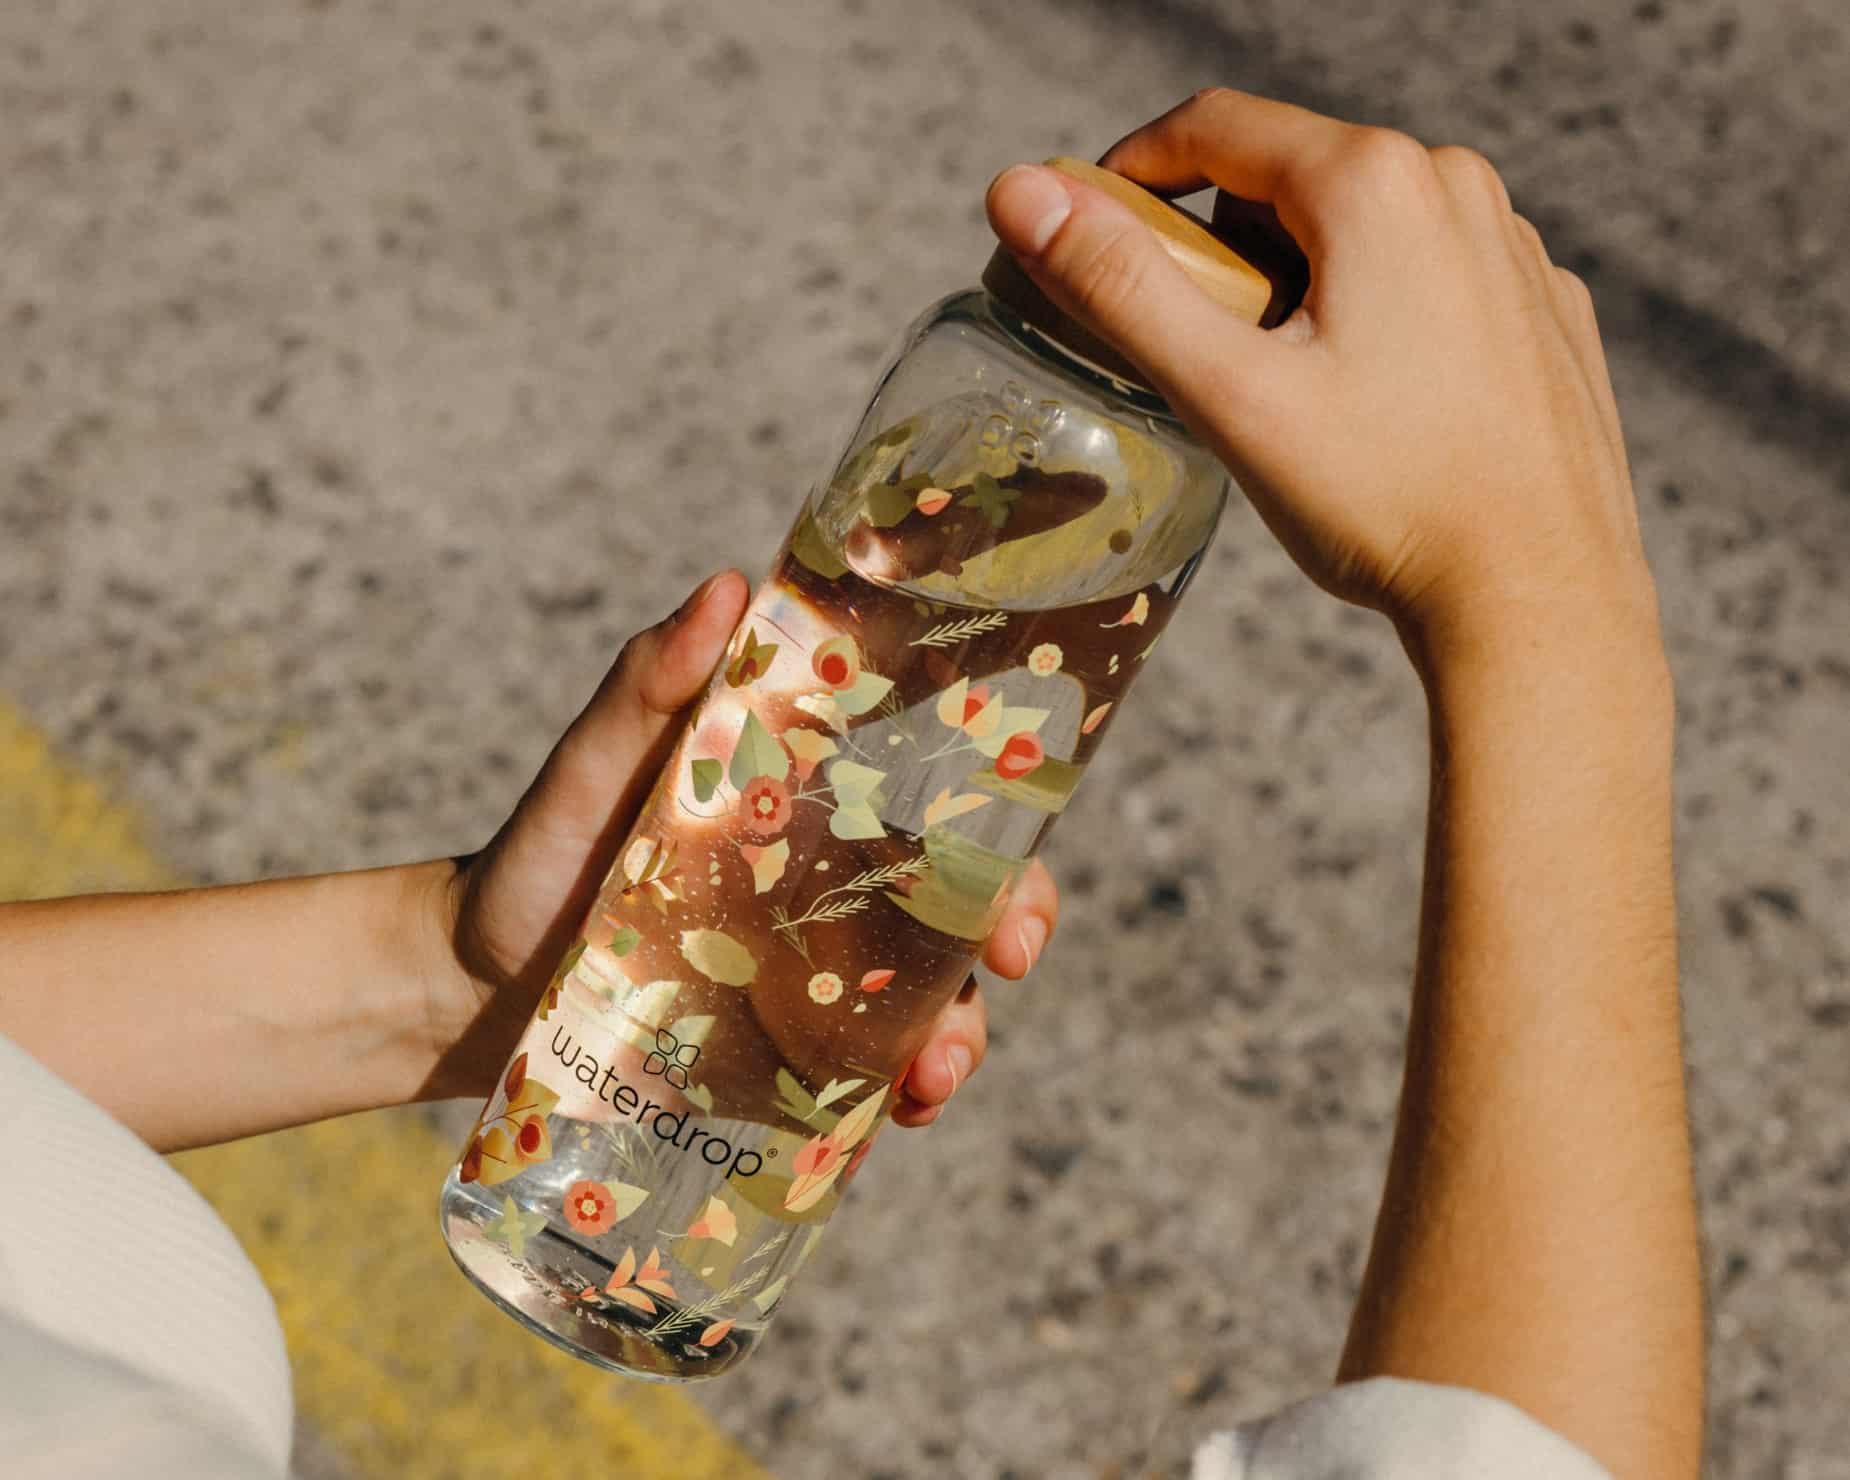 Louis Vuitton glass water bottle (New) 🧶Size: O/S🧶 💰Price: $120